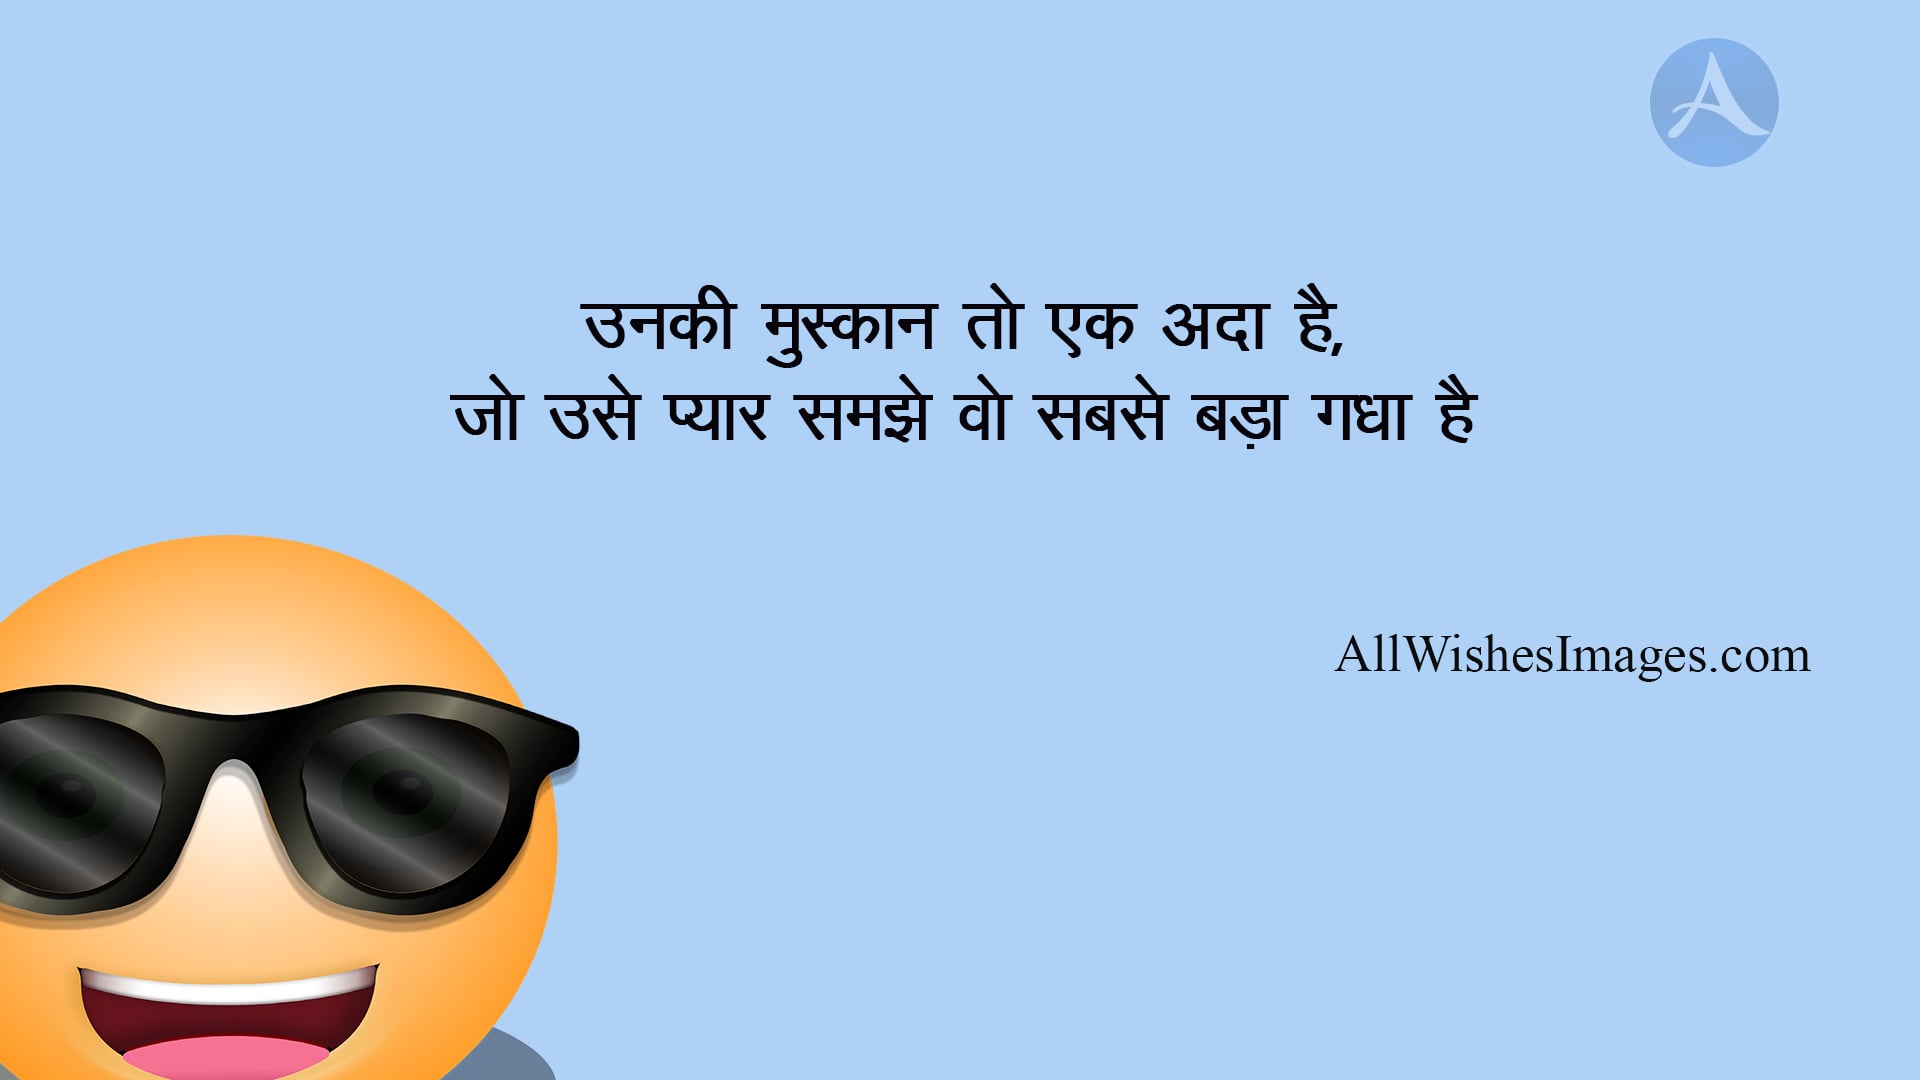 Funny Shayari Hindi Hd Download - All Wishes Images - Images for WhatsApp